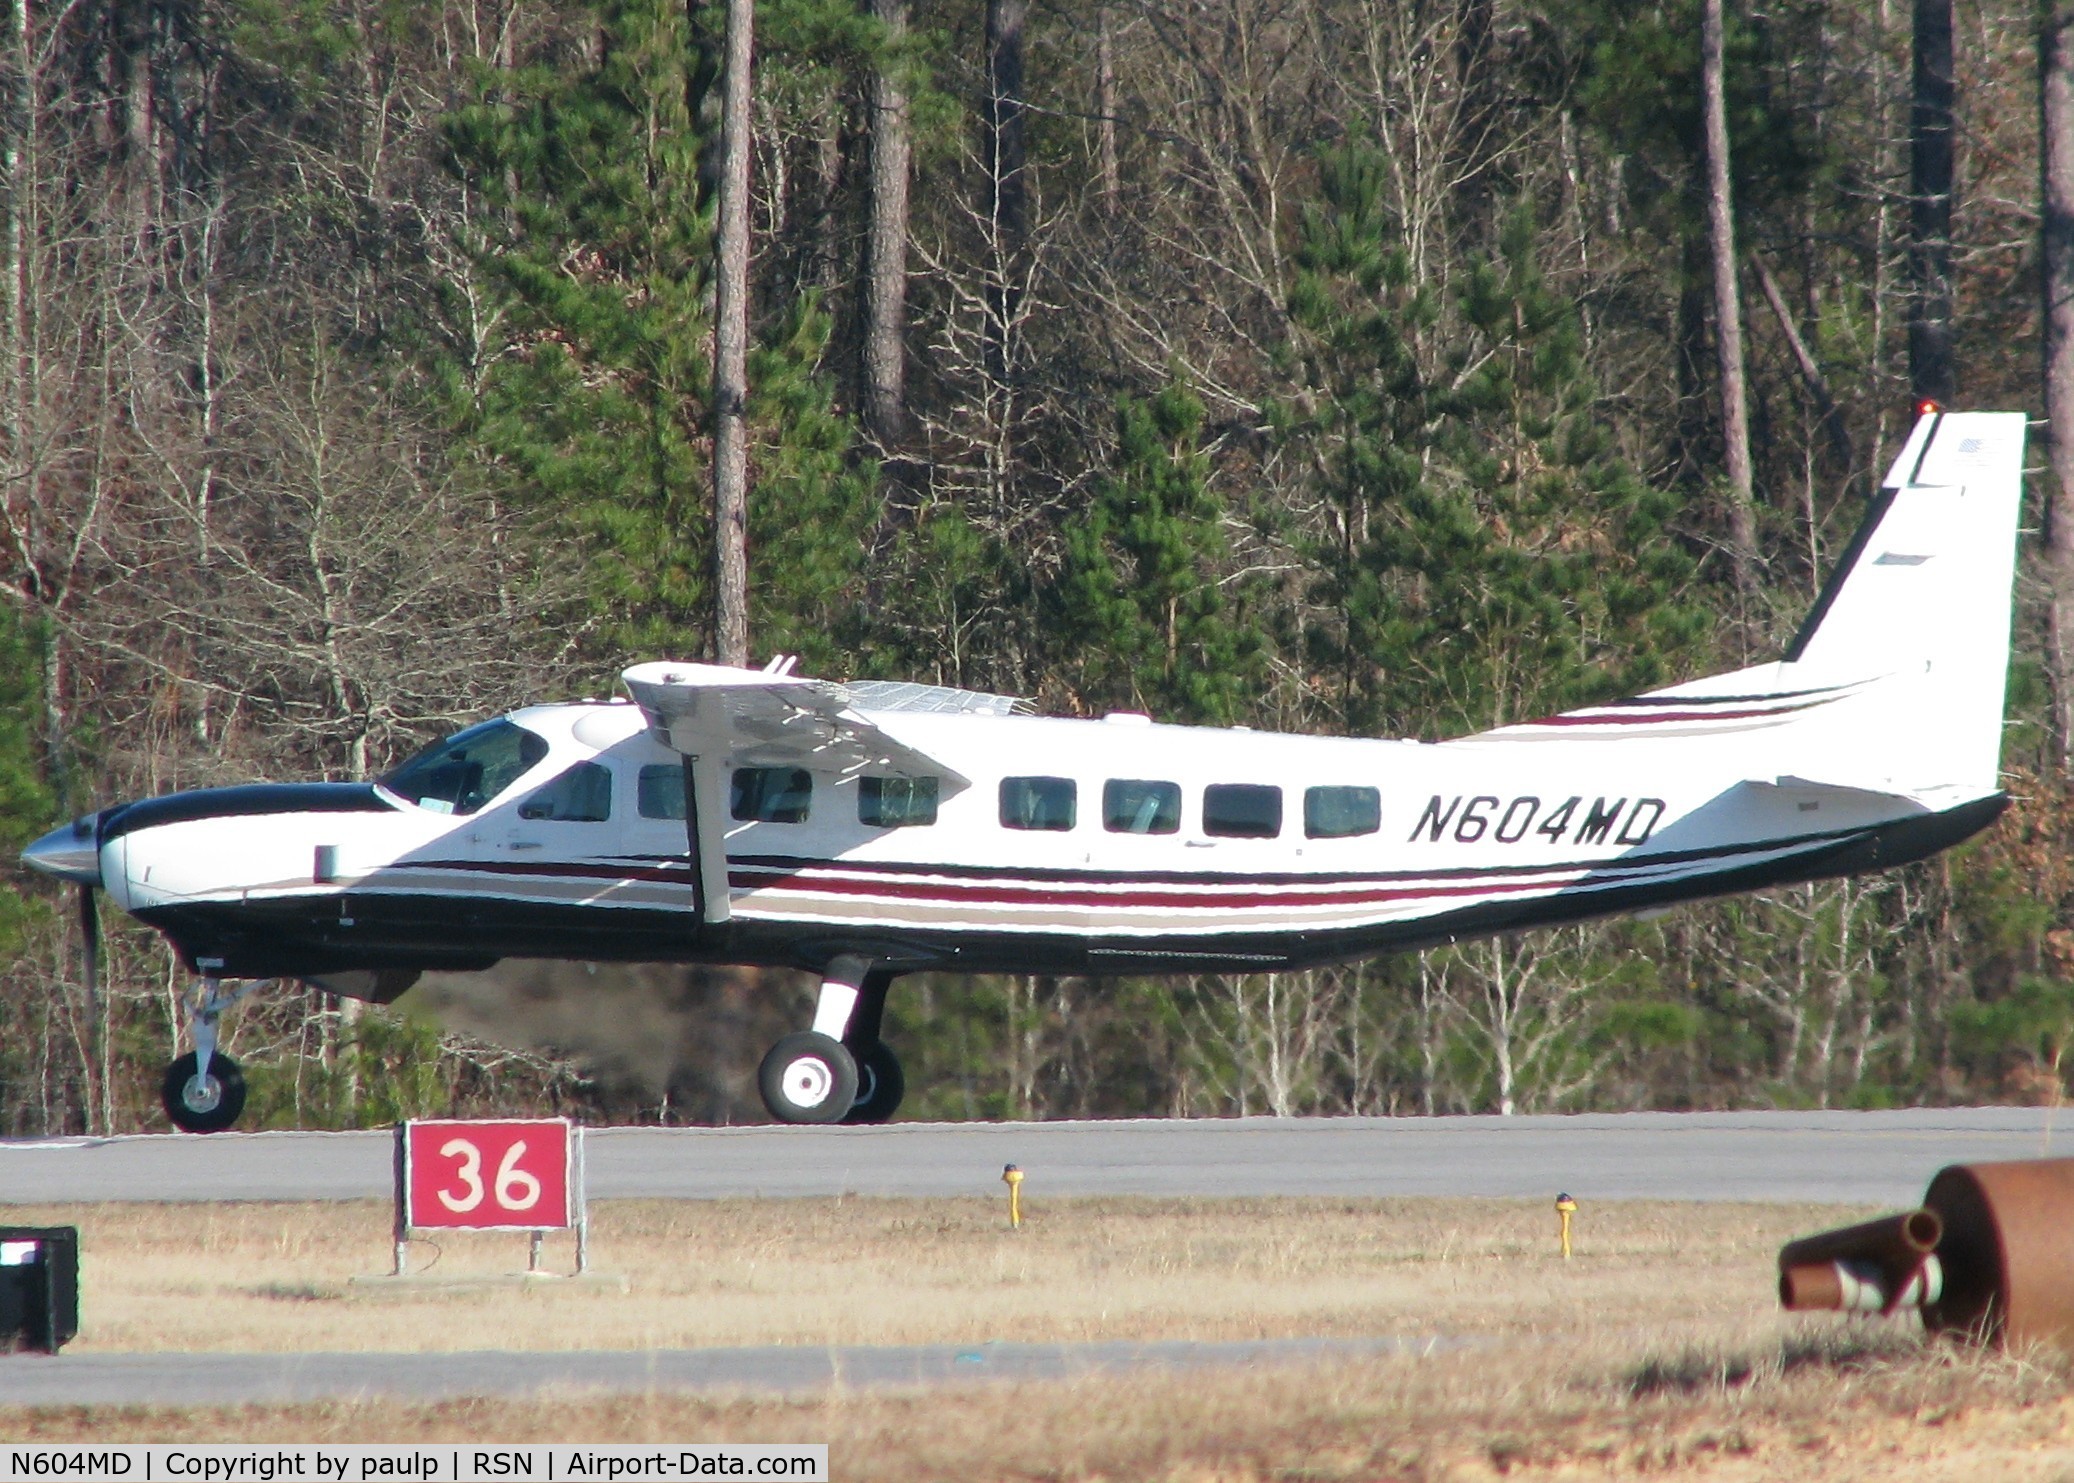 N604MD, 2004 Cessna 208B C/N 208B1075, Taking off from the Ruston,Louisiana airport.